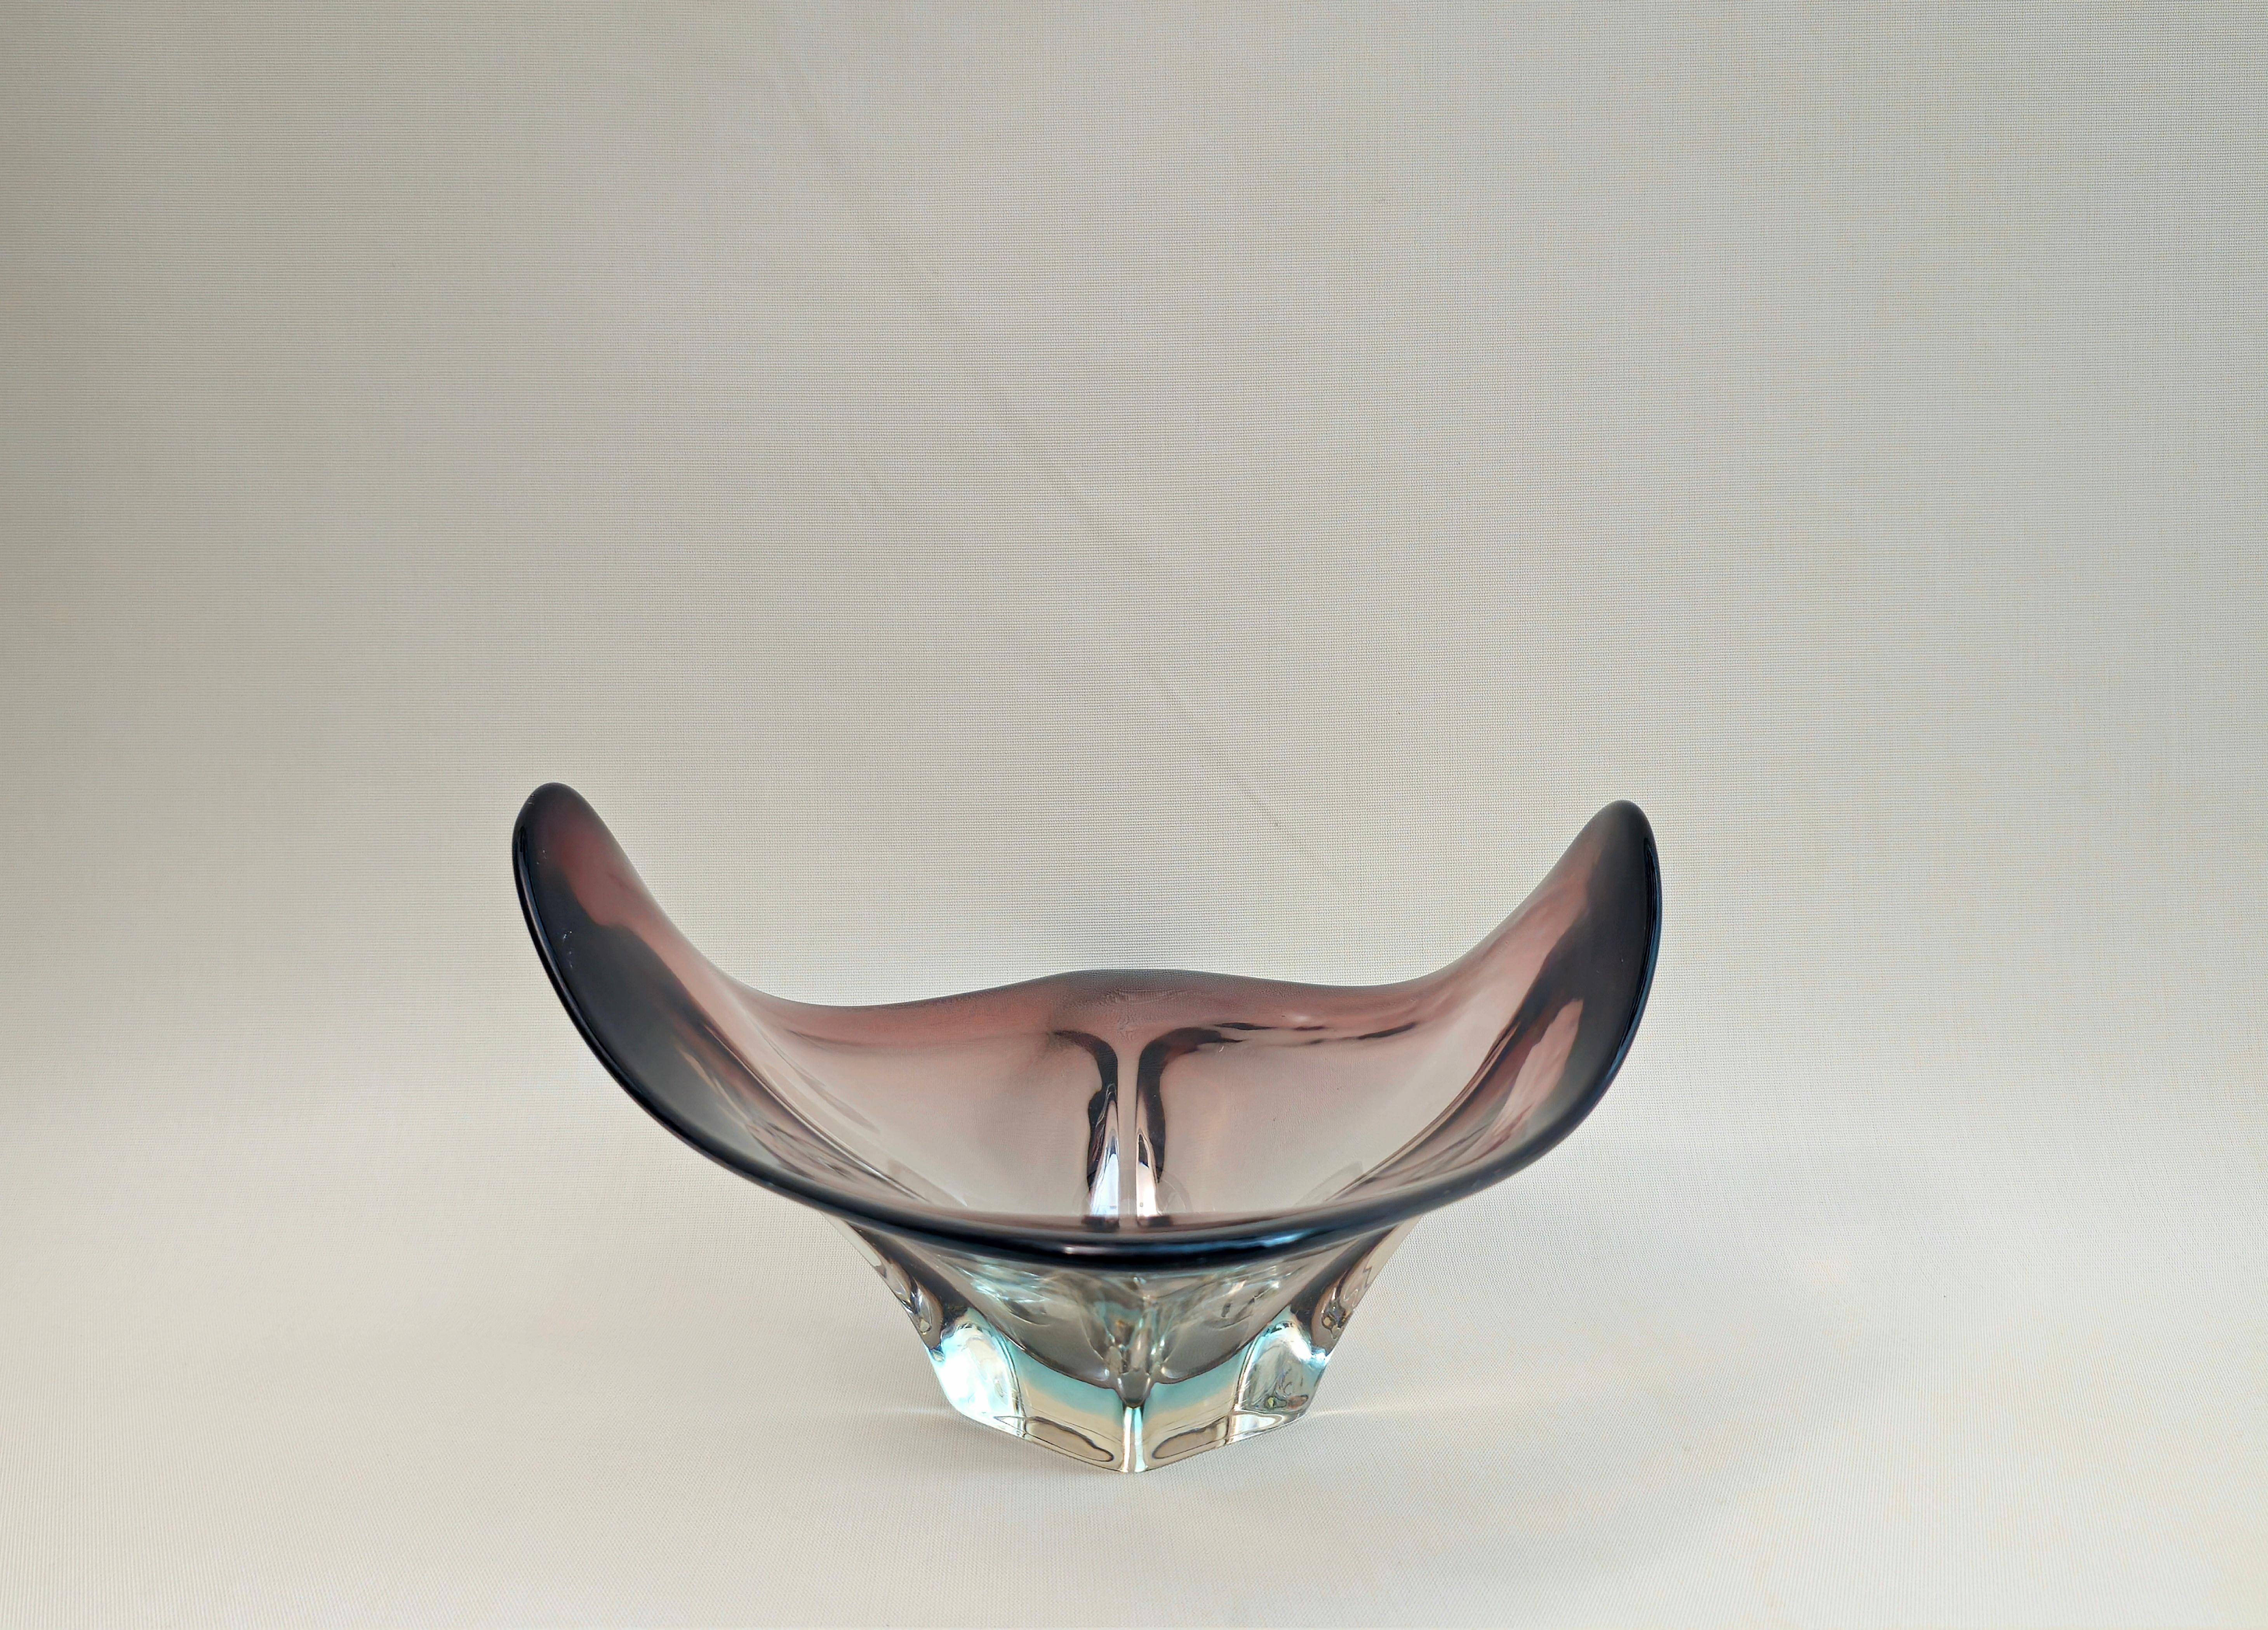 Centerpiece Decorative Object Murano Glass Multiform Midcentury Italy 1970s For Sale 1